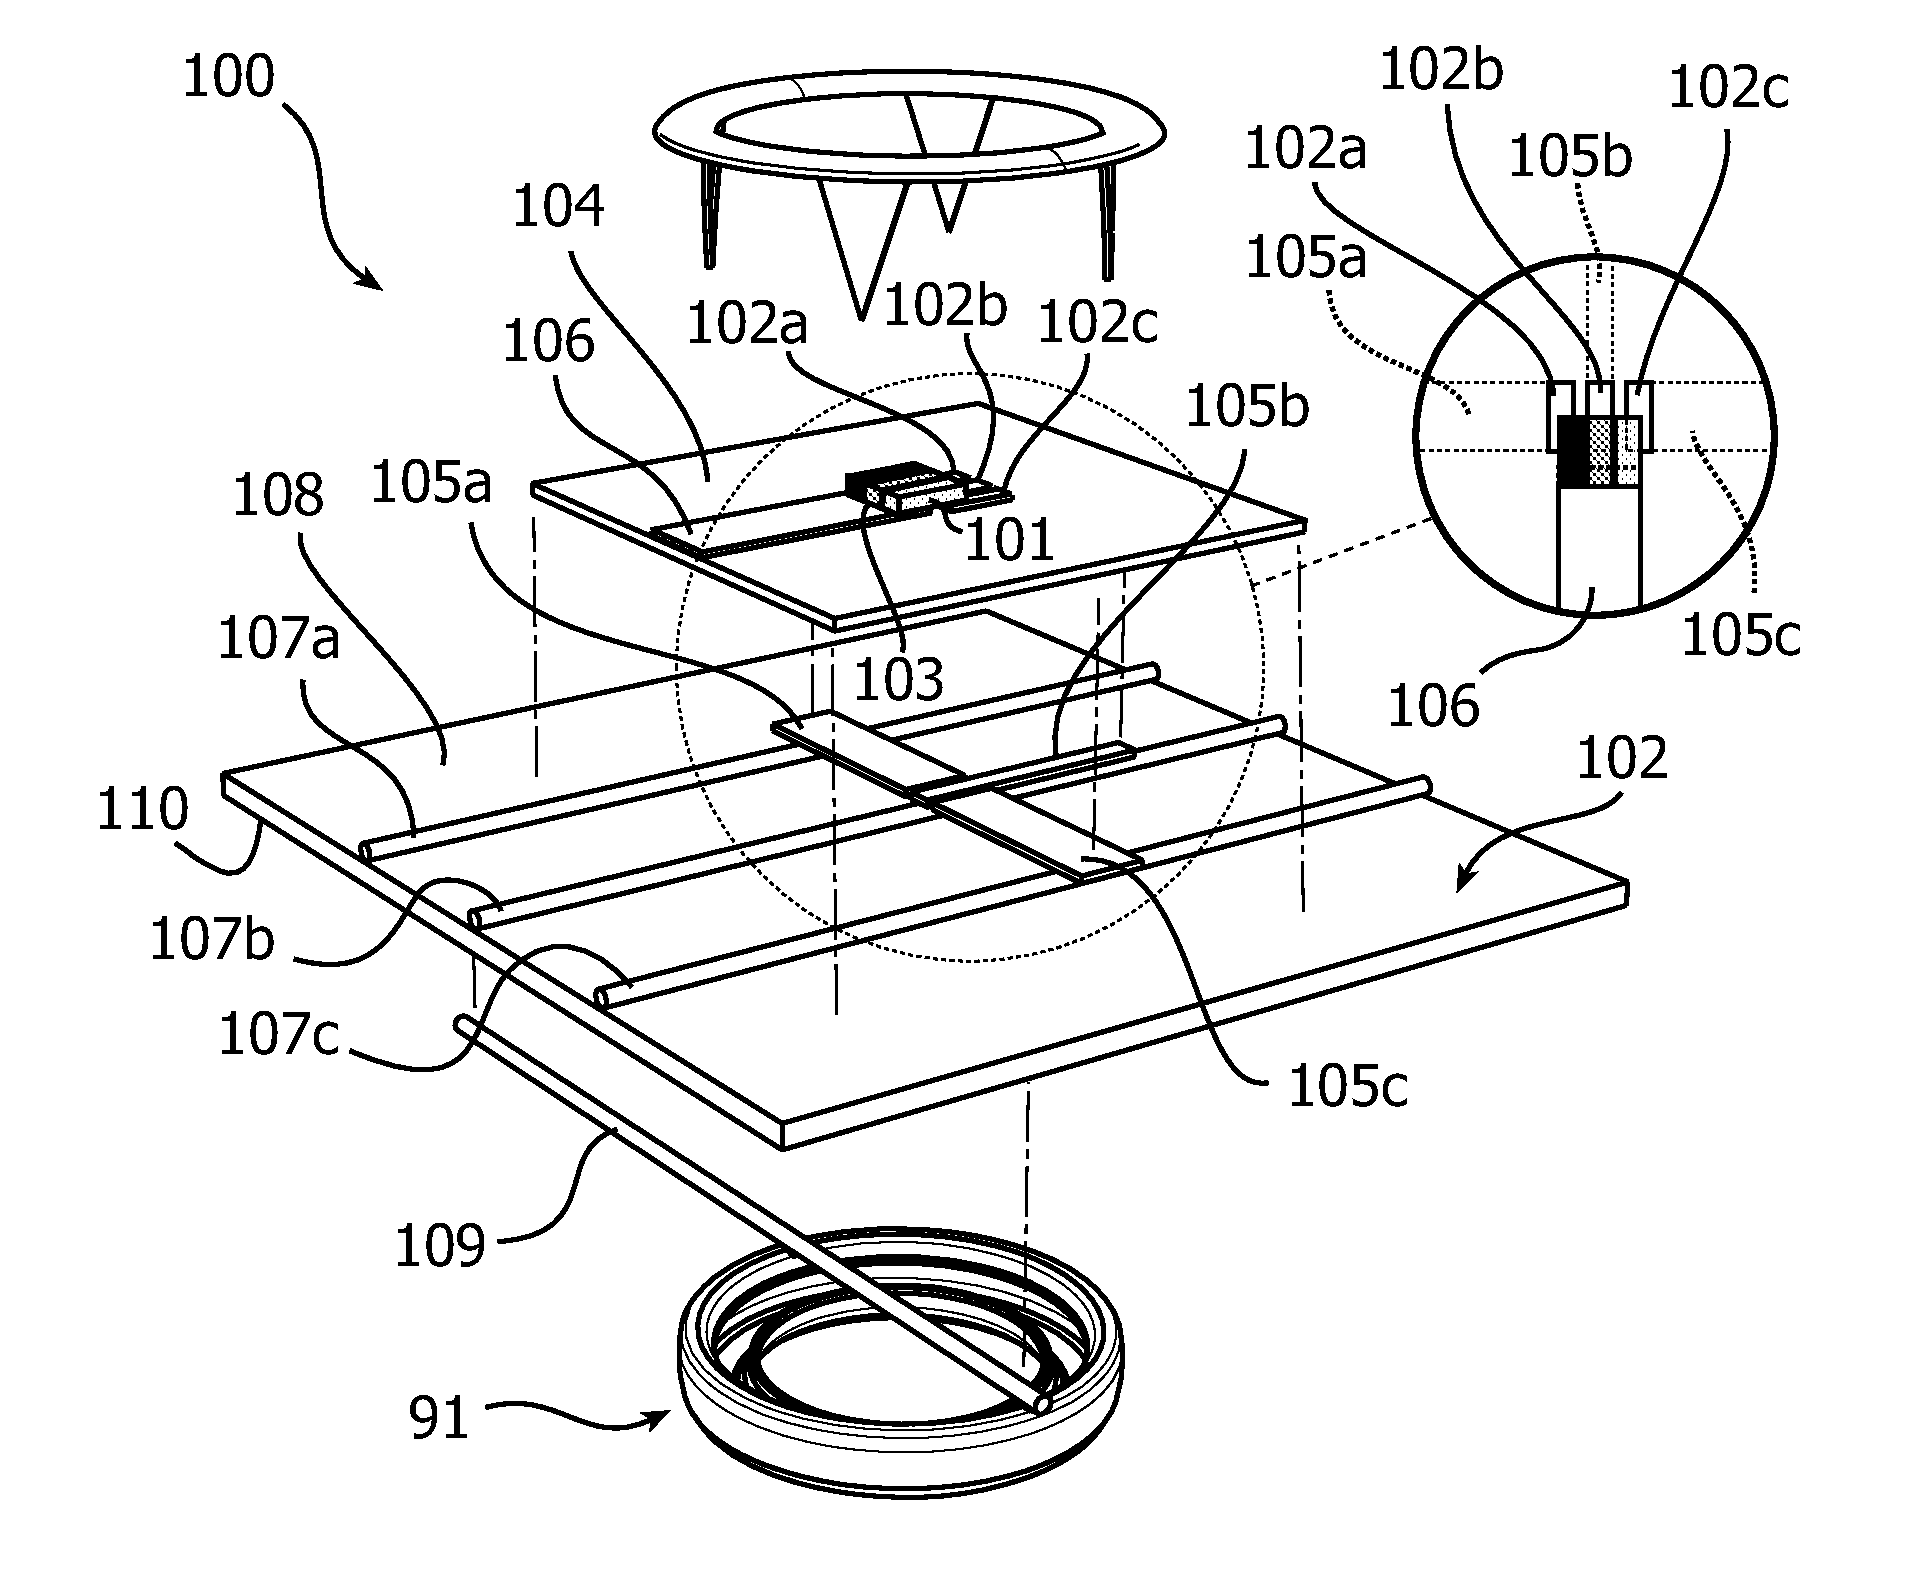 Electronic assembly for attachment to a fabric substrate, electronic textile, and method of manufacturing such an electronic textile